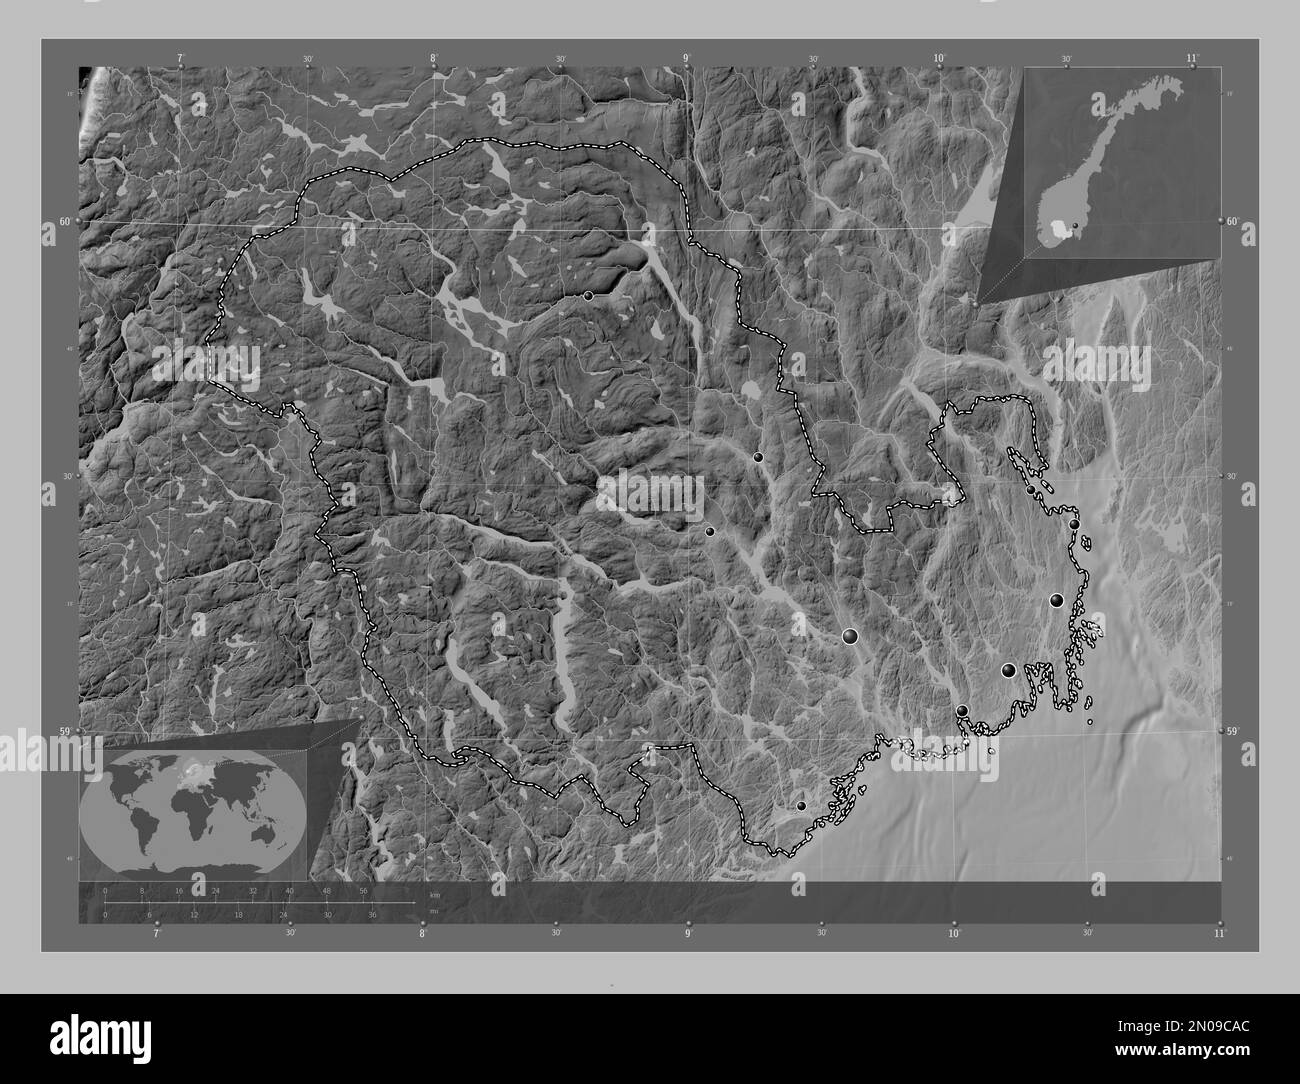 Vestfold og Telemark, county of Norway. Grayscale elevation map with lakes and rivers. Locations of major cities of the region. Corner auxiliary locat Stock Photo